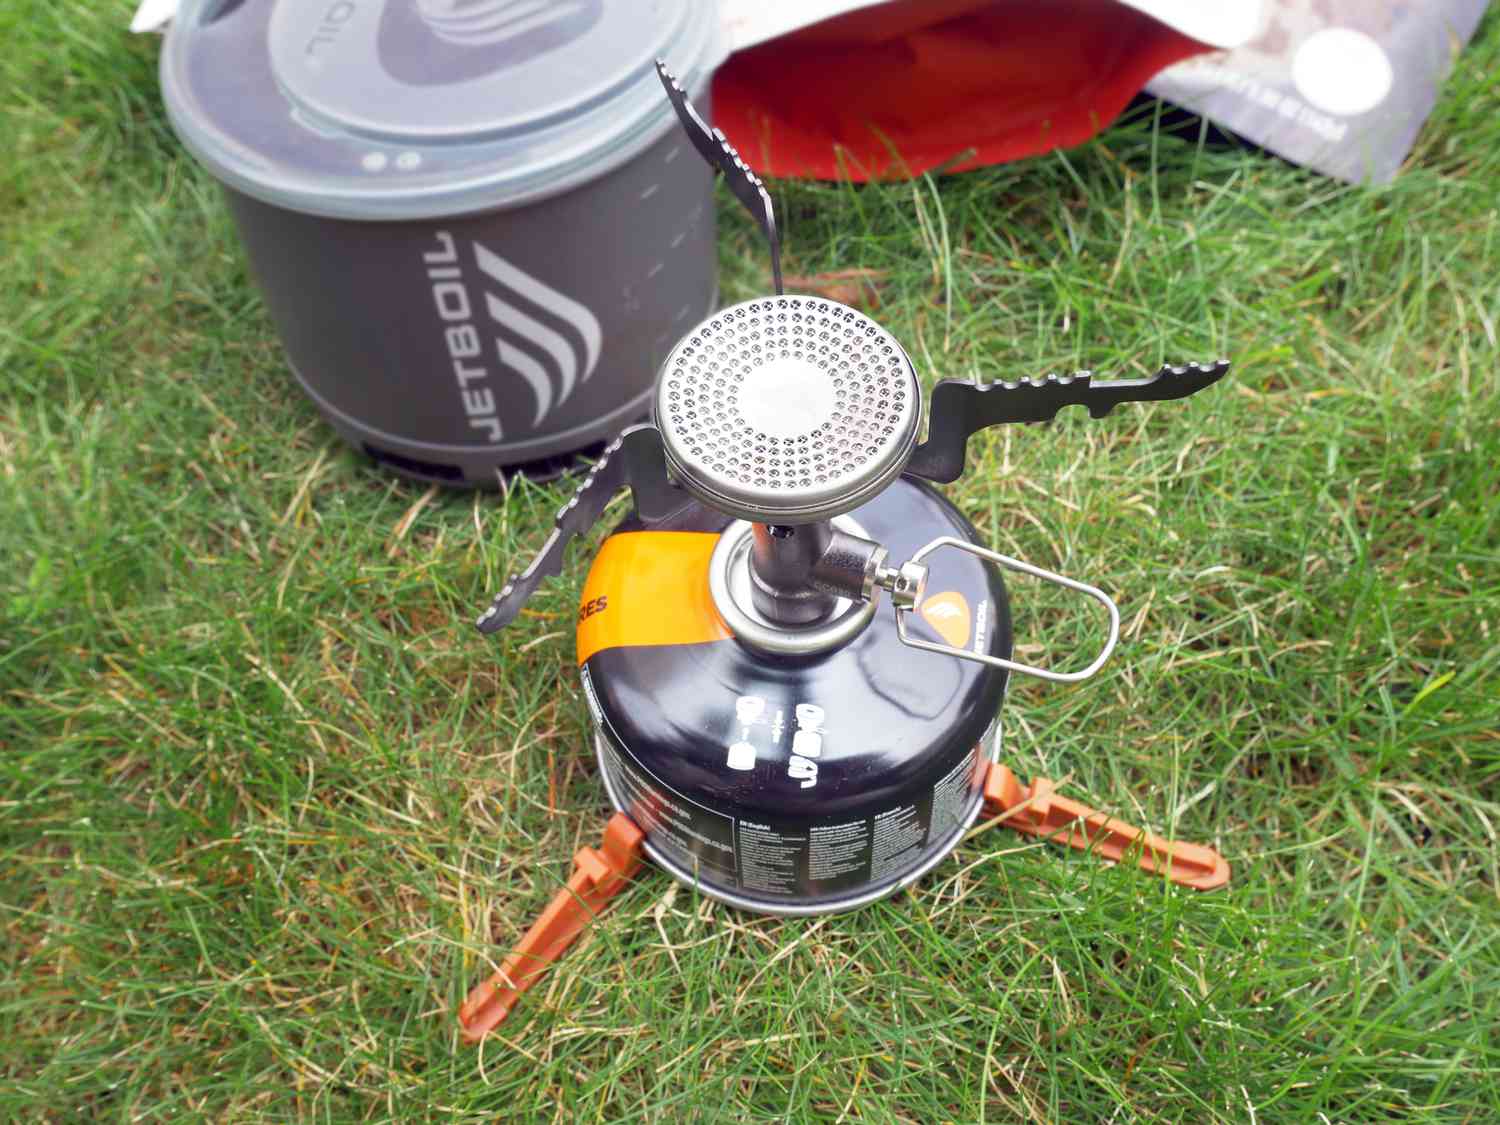 jetboil stove on grass